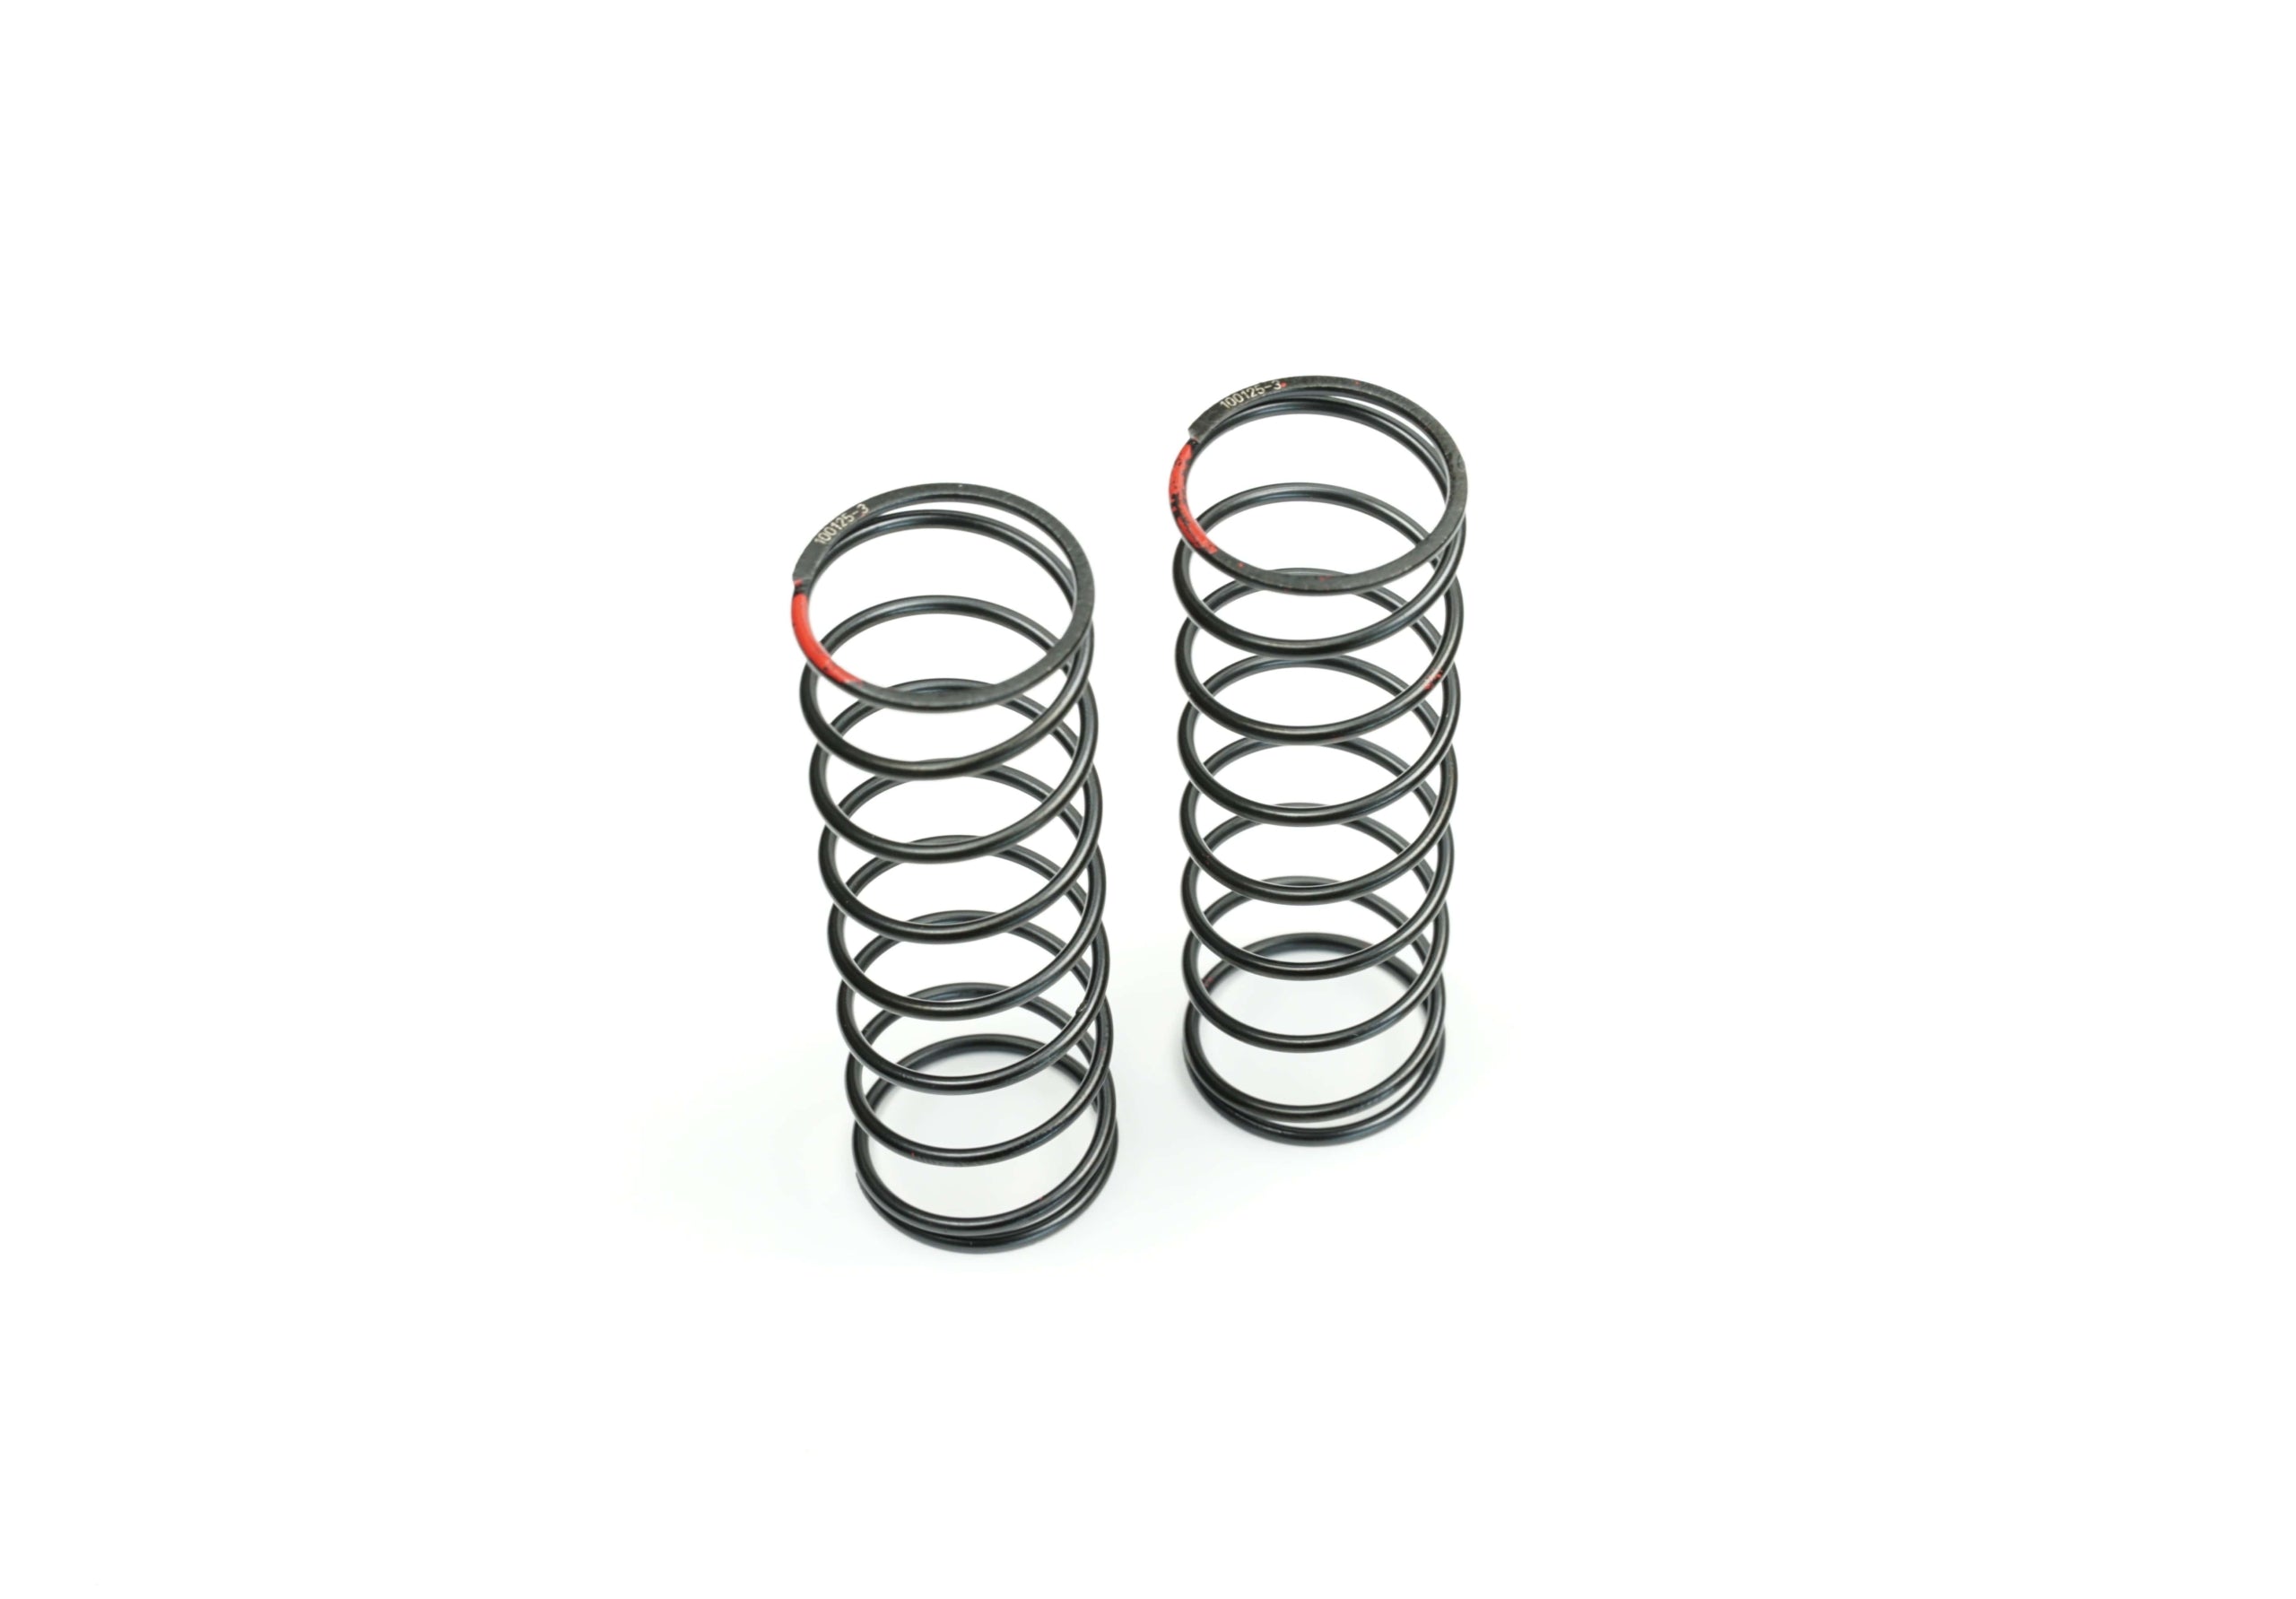 WIRC Hard Front Springs (2) (Red)